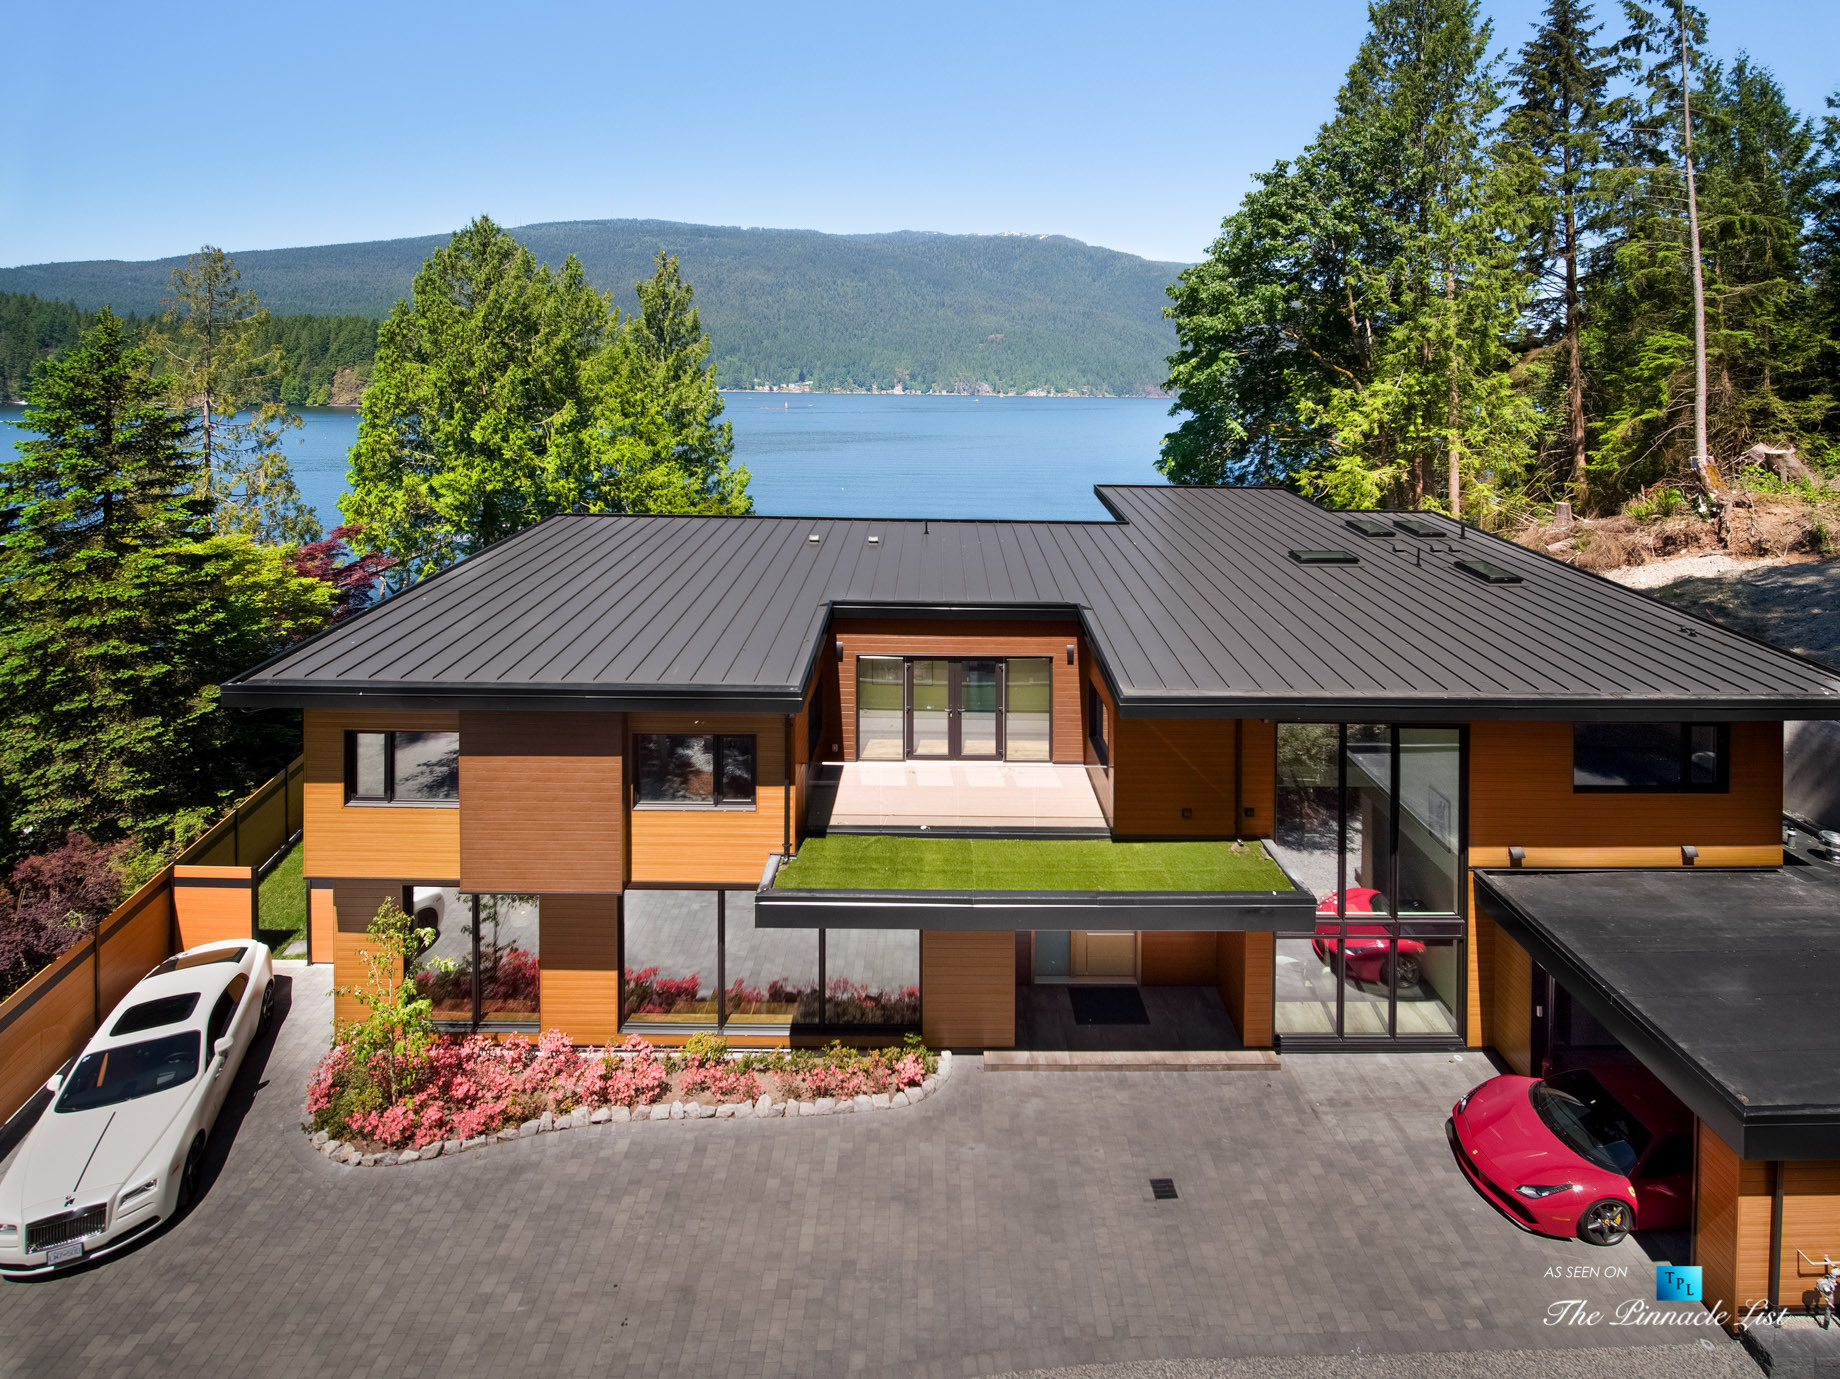 3350 Watson Rd, Belcarra, BC, Canada - Vancouver Luxury Real Estate - Modern Oceanfront Architectural Home with Red Ferrari and White Rolls-Royce